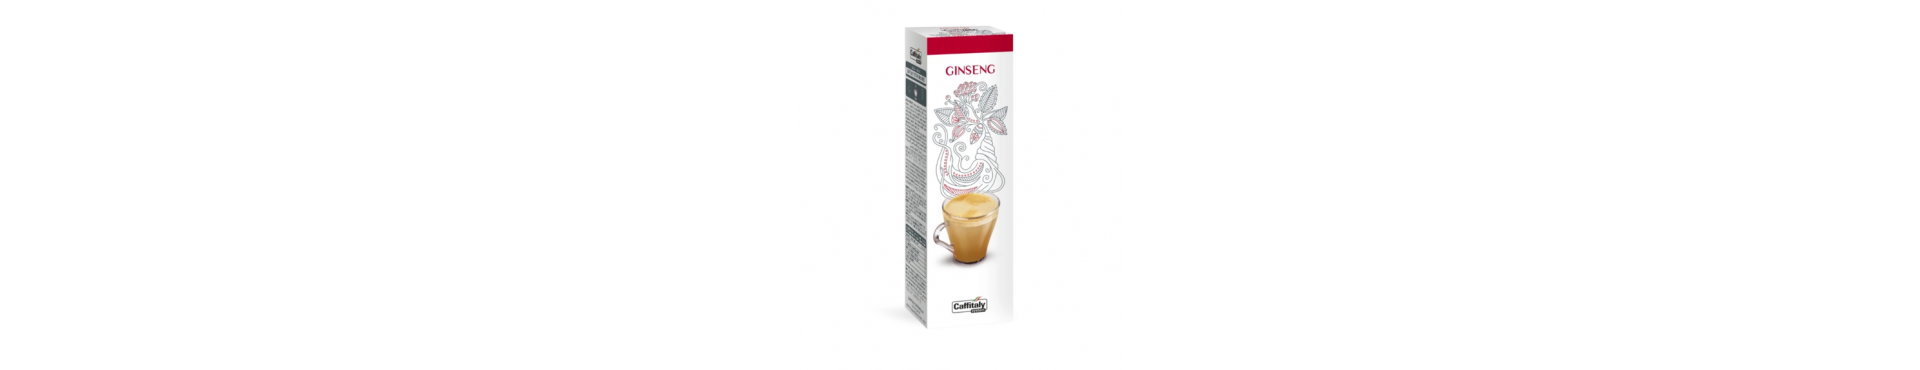 Capsule GinsenCapsule Ginseng Caffitaly originali, 100% ginseng, prezzi Outletg Caffitaly originali, 100% ginseng, prezzi Outlet